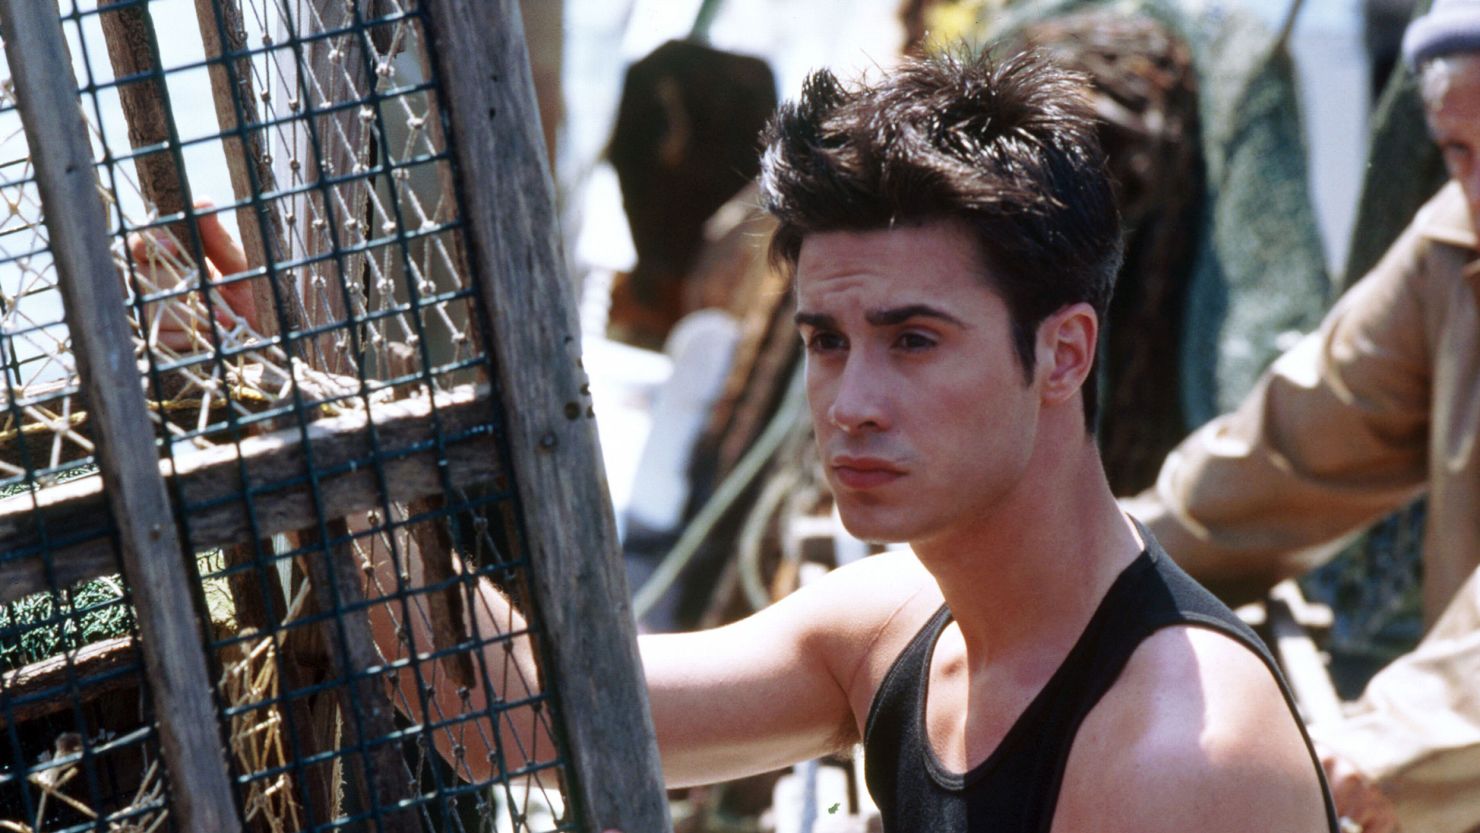 In a new interview, Freddie Prinze Jr. says making 1997's 'I Know What You Did Last Summer' was a  'miserable' work experience.